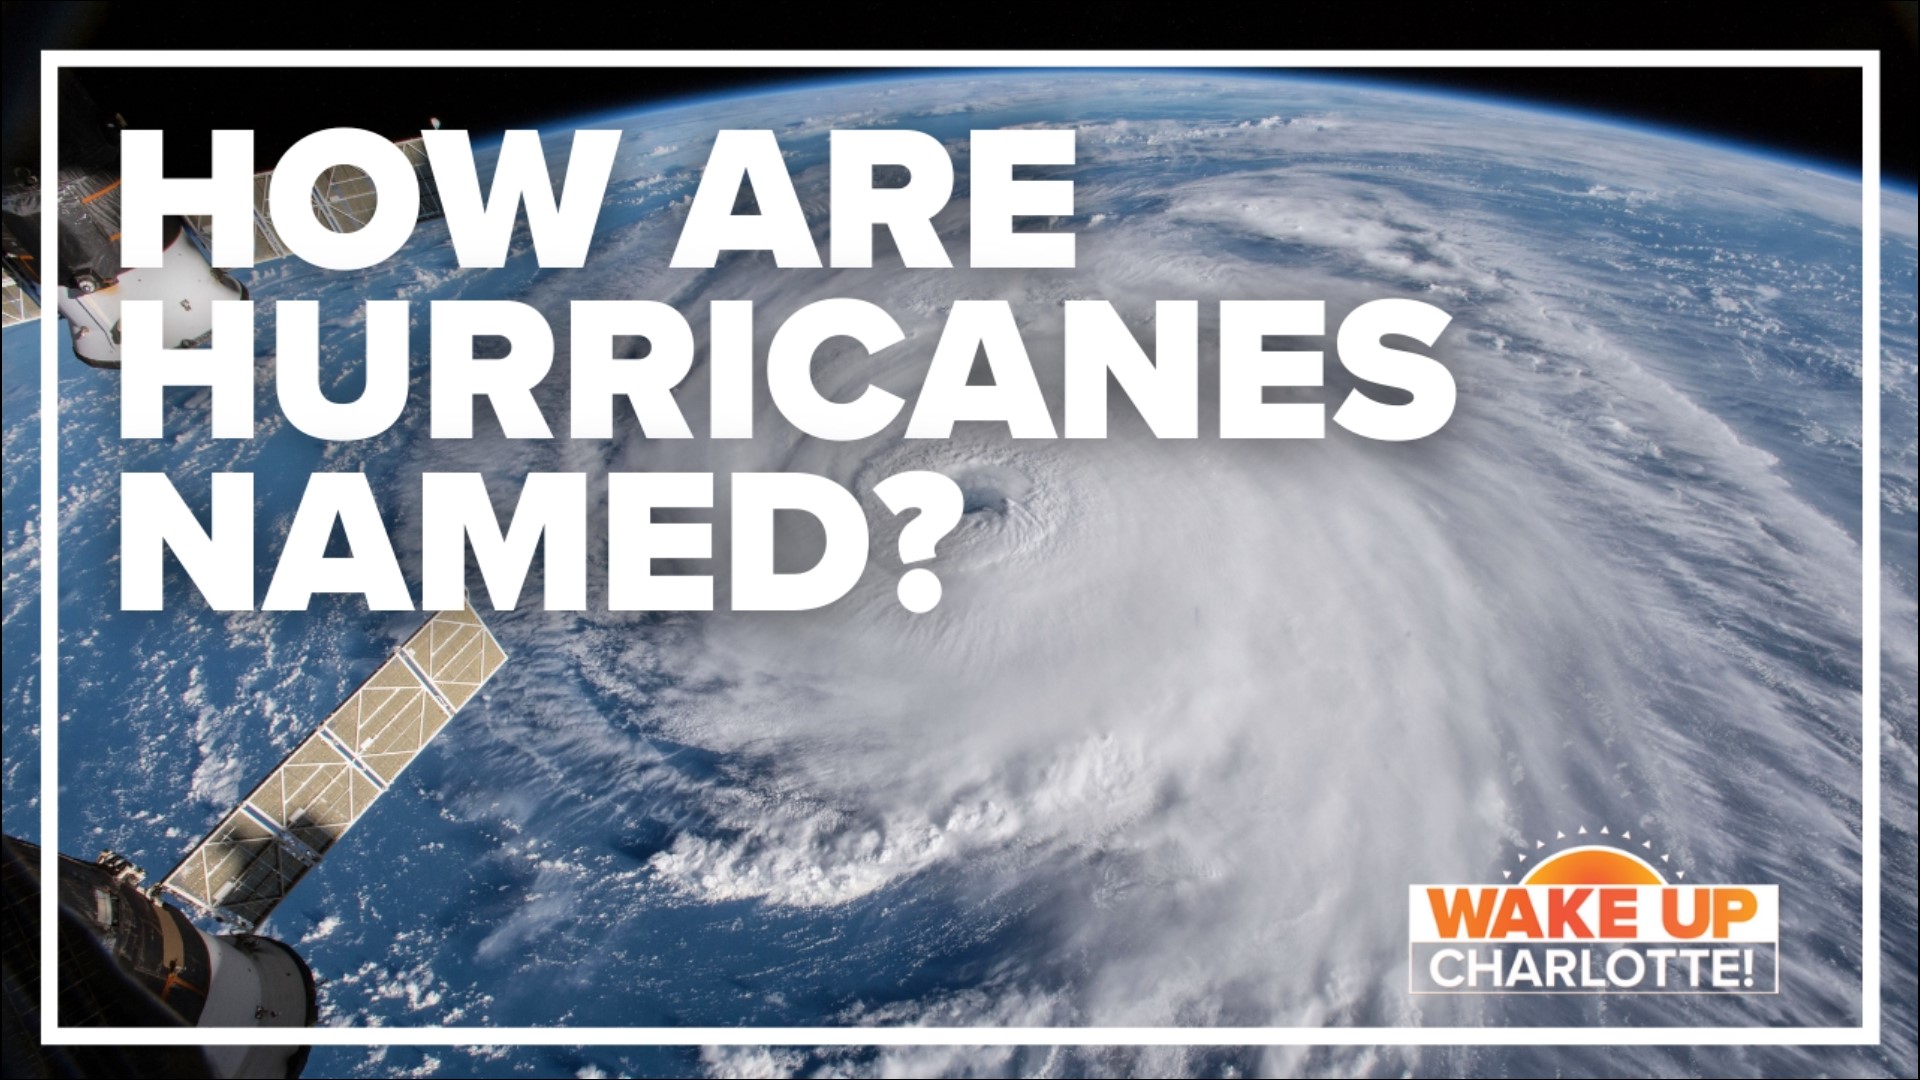 Hurricane season is here. We're verifying a claim about how storms are named.